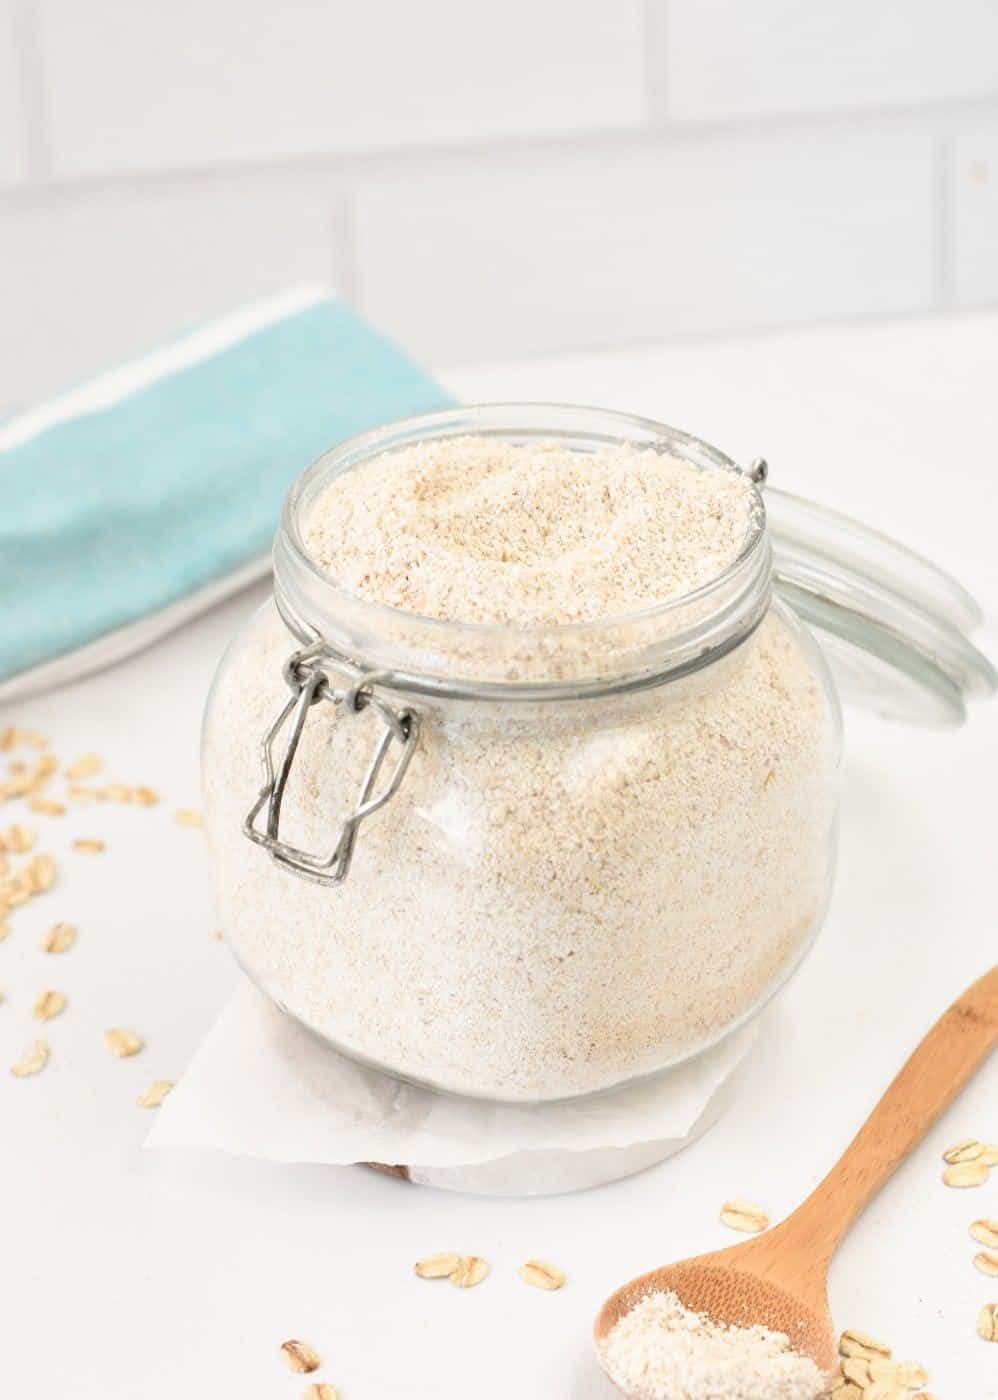 Oat Flour at Home (2 Easy Ways)